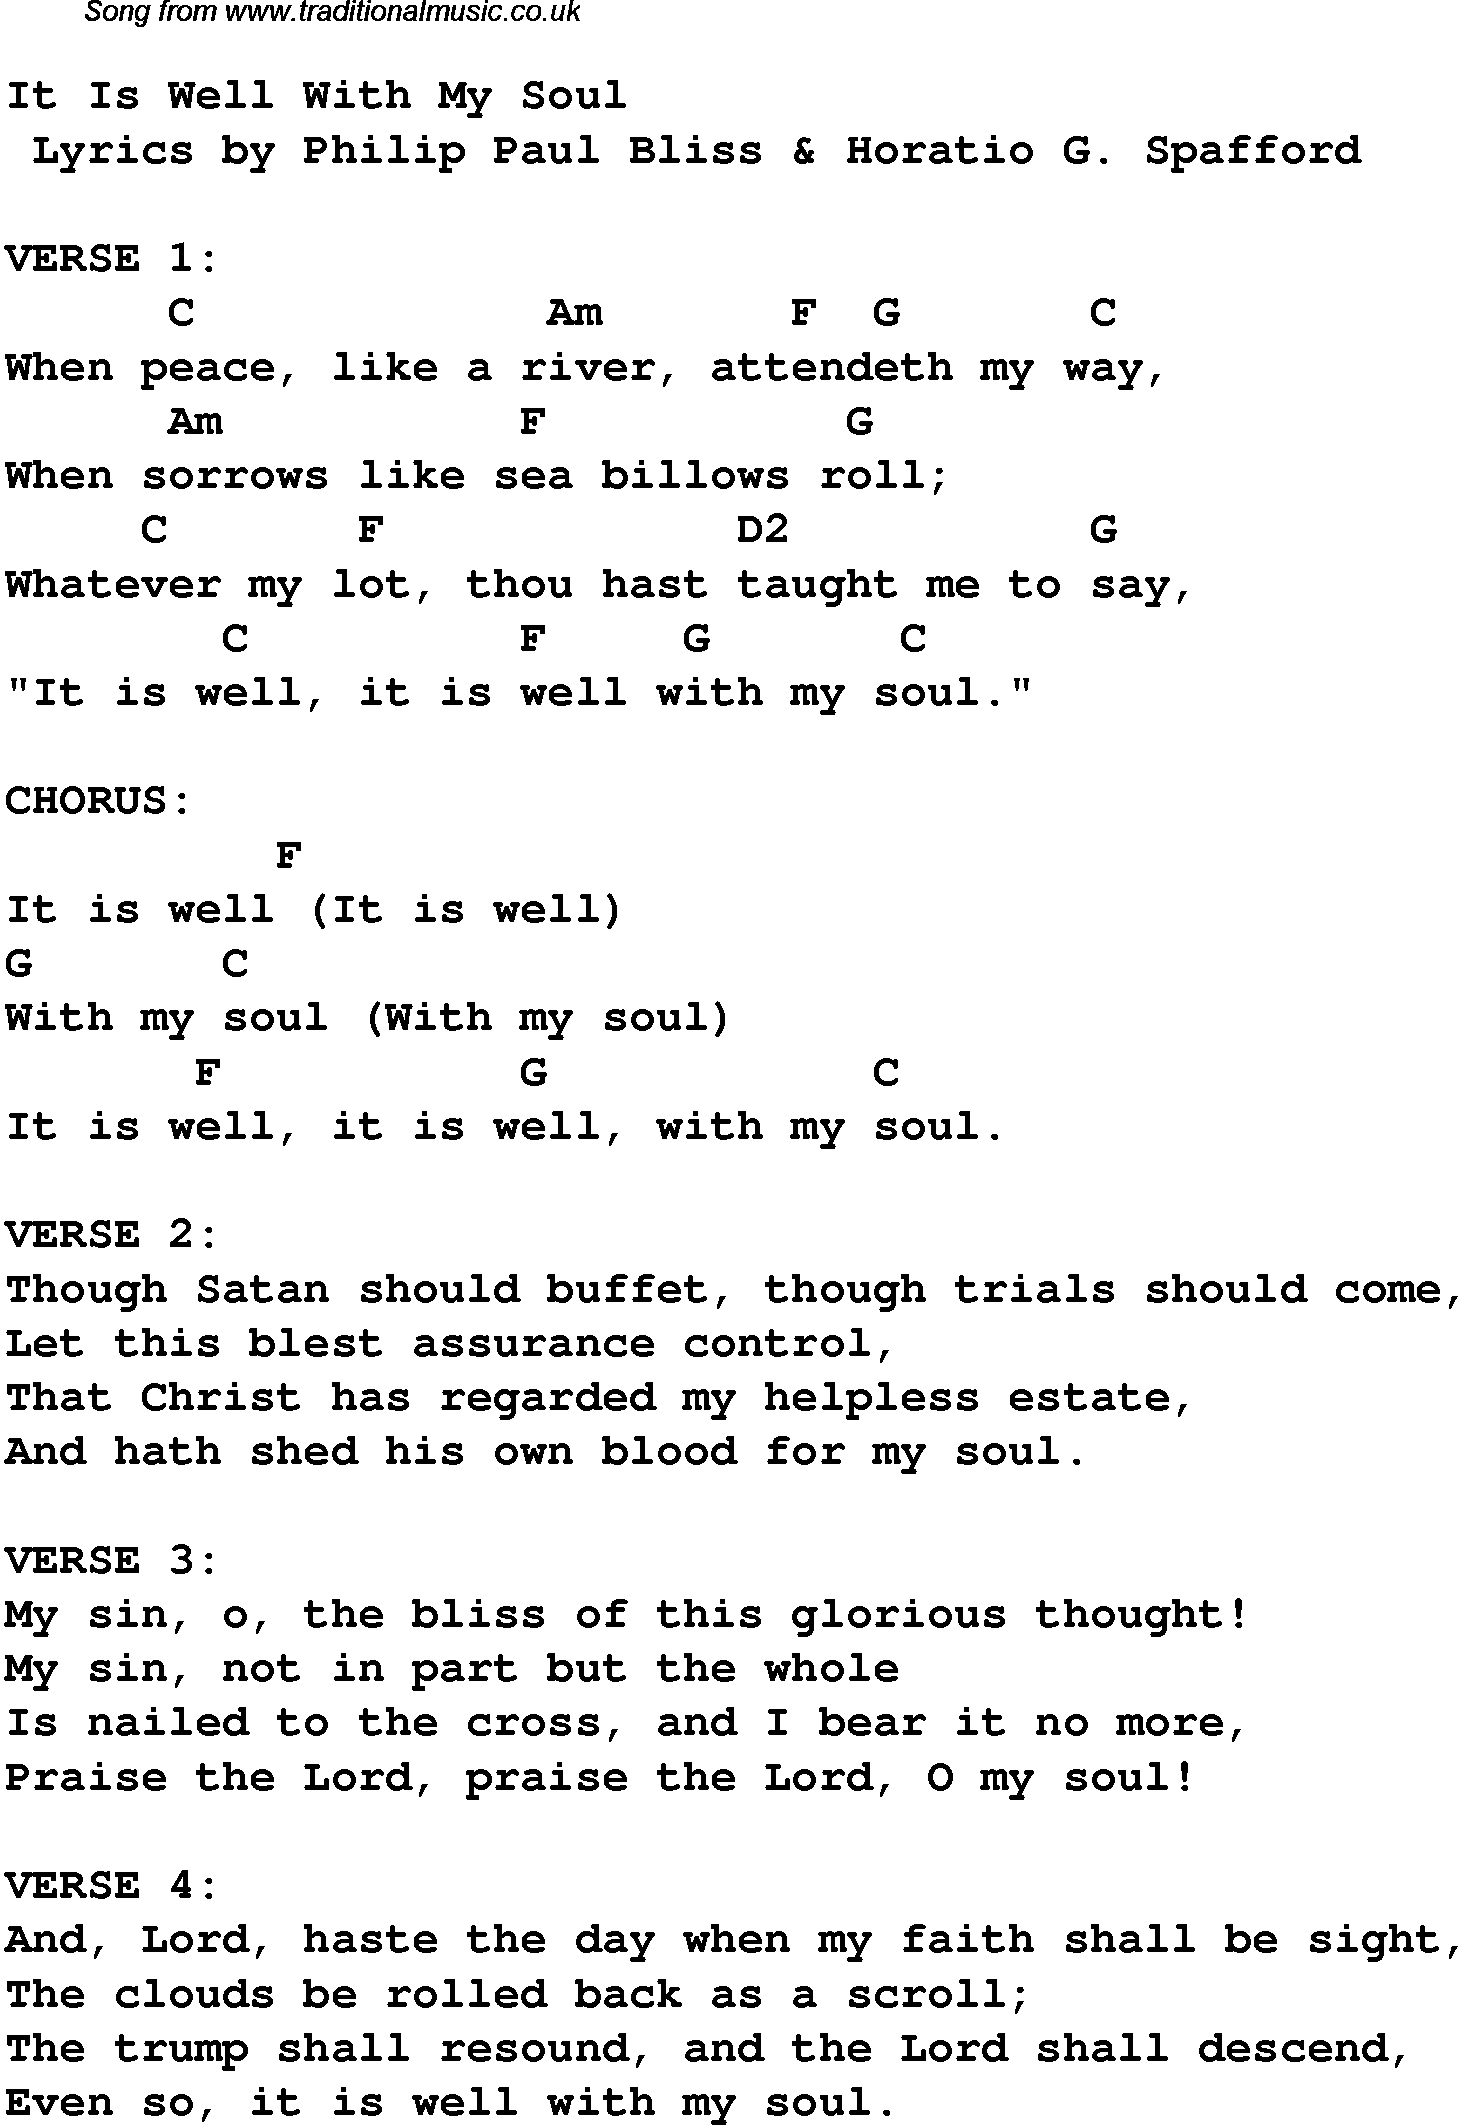 It Is Well Chords It Is Well With My Soul Christian Gospel Song Lyrics And Chords